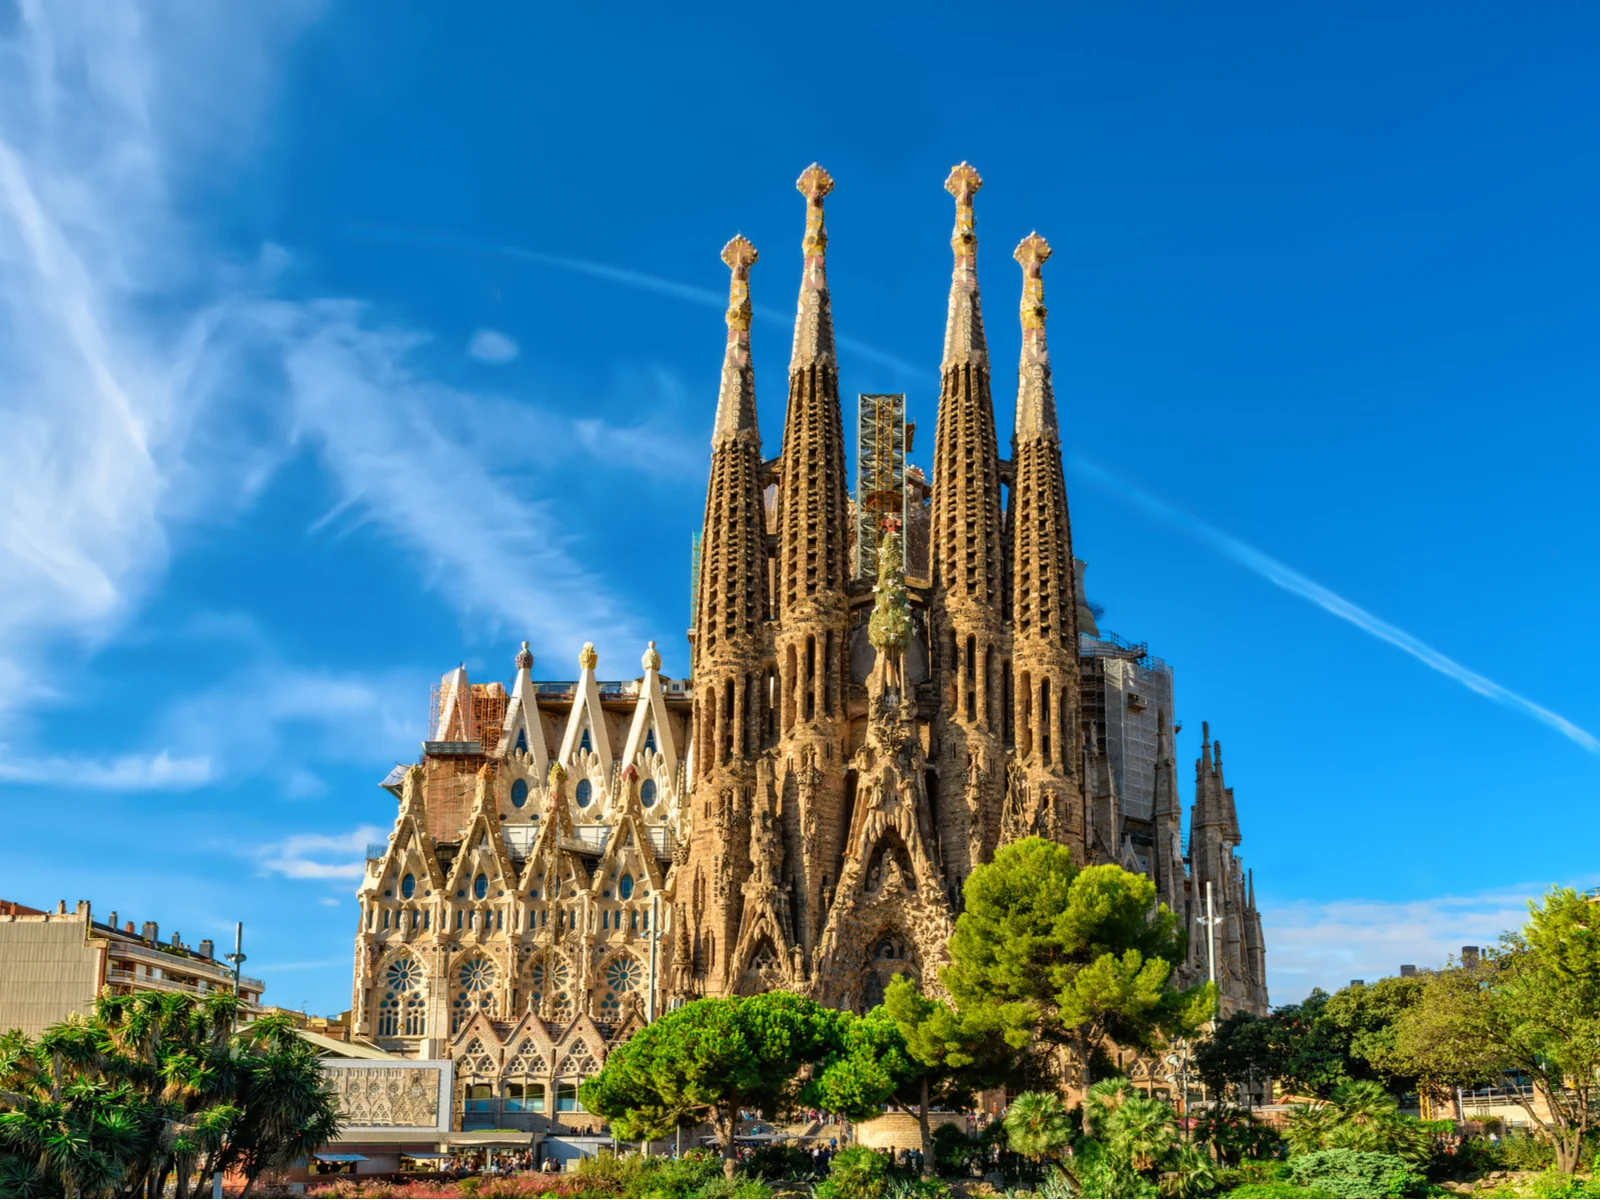 Cathedral of La Sagrada Familia pictured on a blue sky day during the best time to visit Barcelona